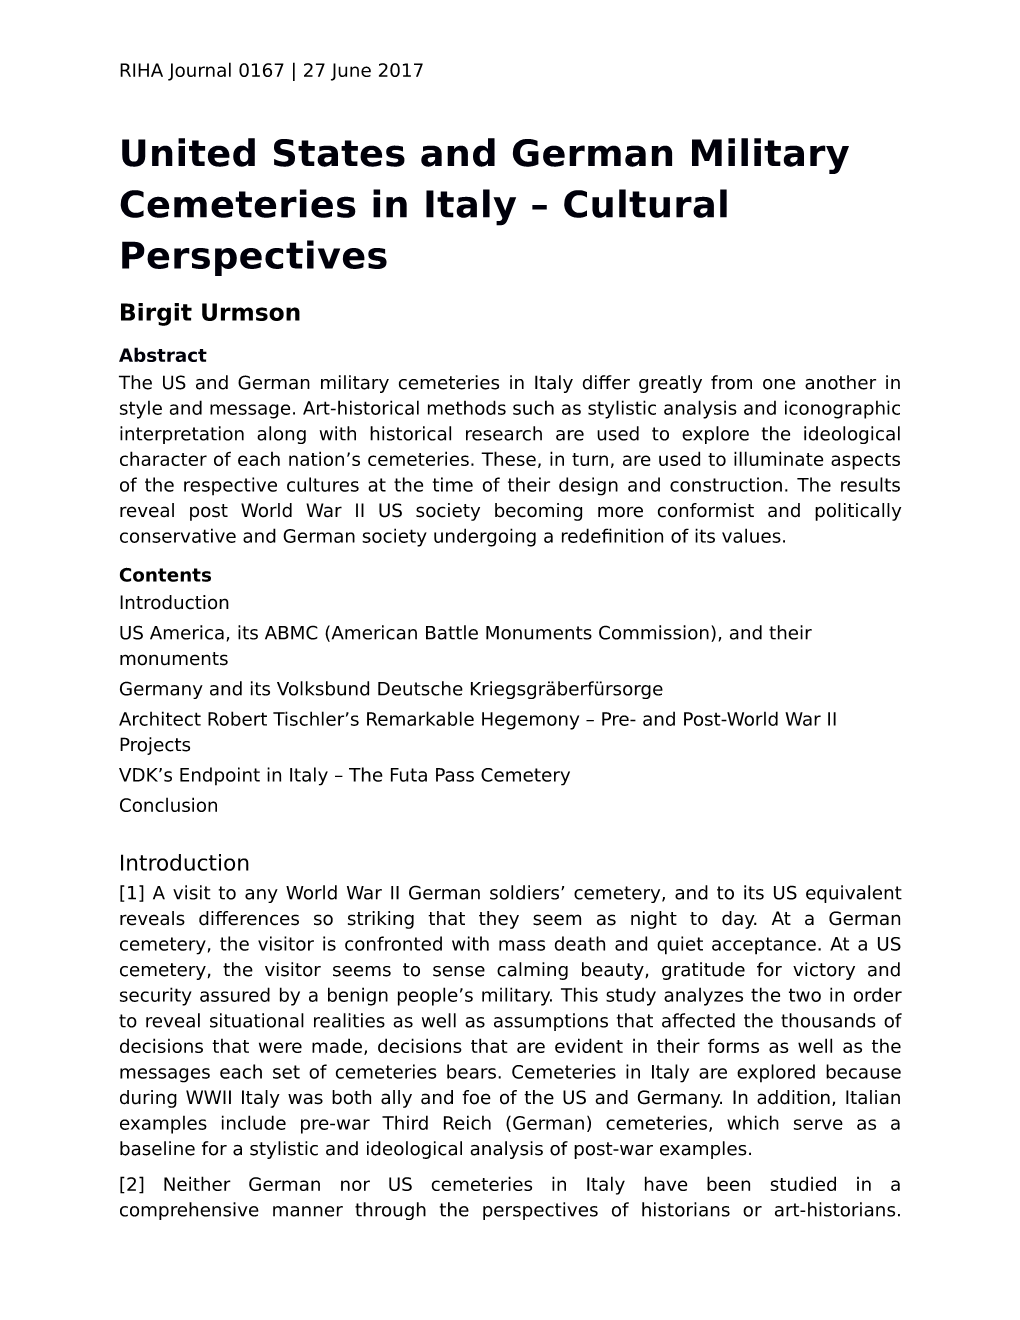 United States and German Military Cemeteries in Italy – Cultural Perspectives